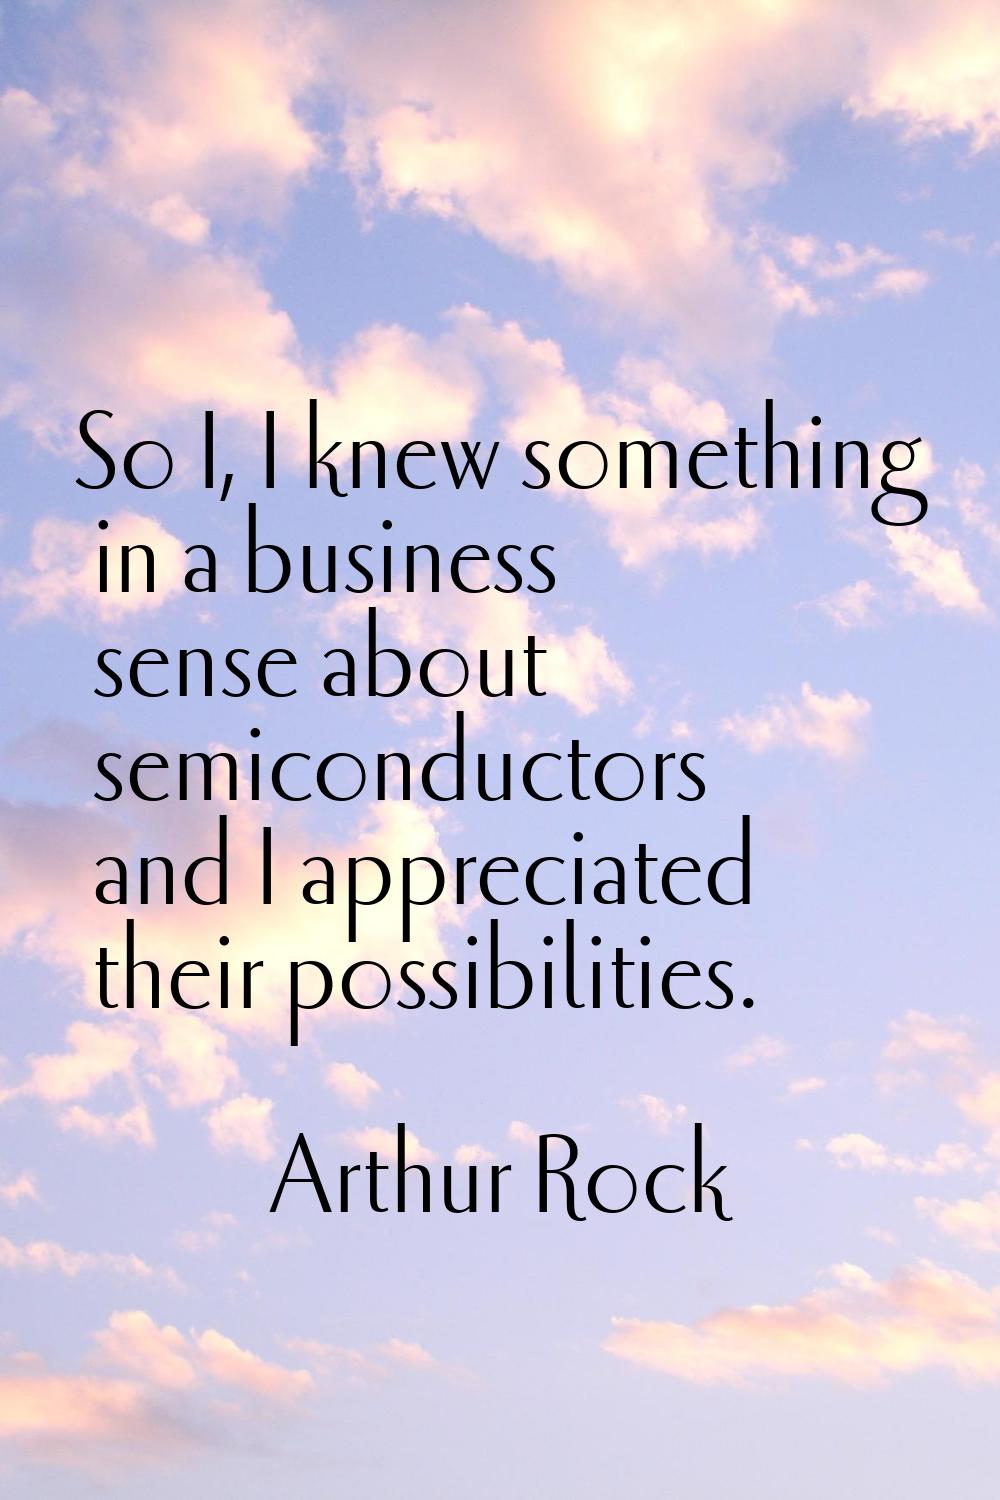 So I, I knew something in a business sense about semiconductors and I appreciated their possibiliti